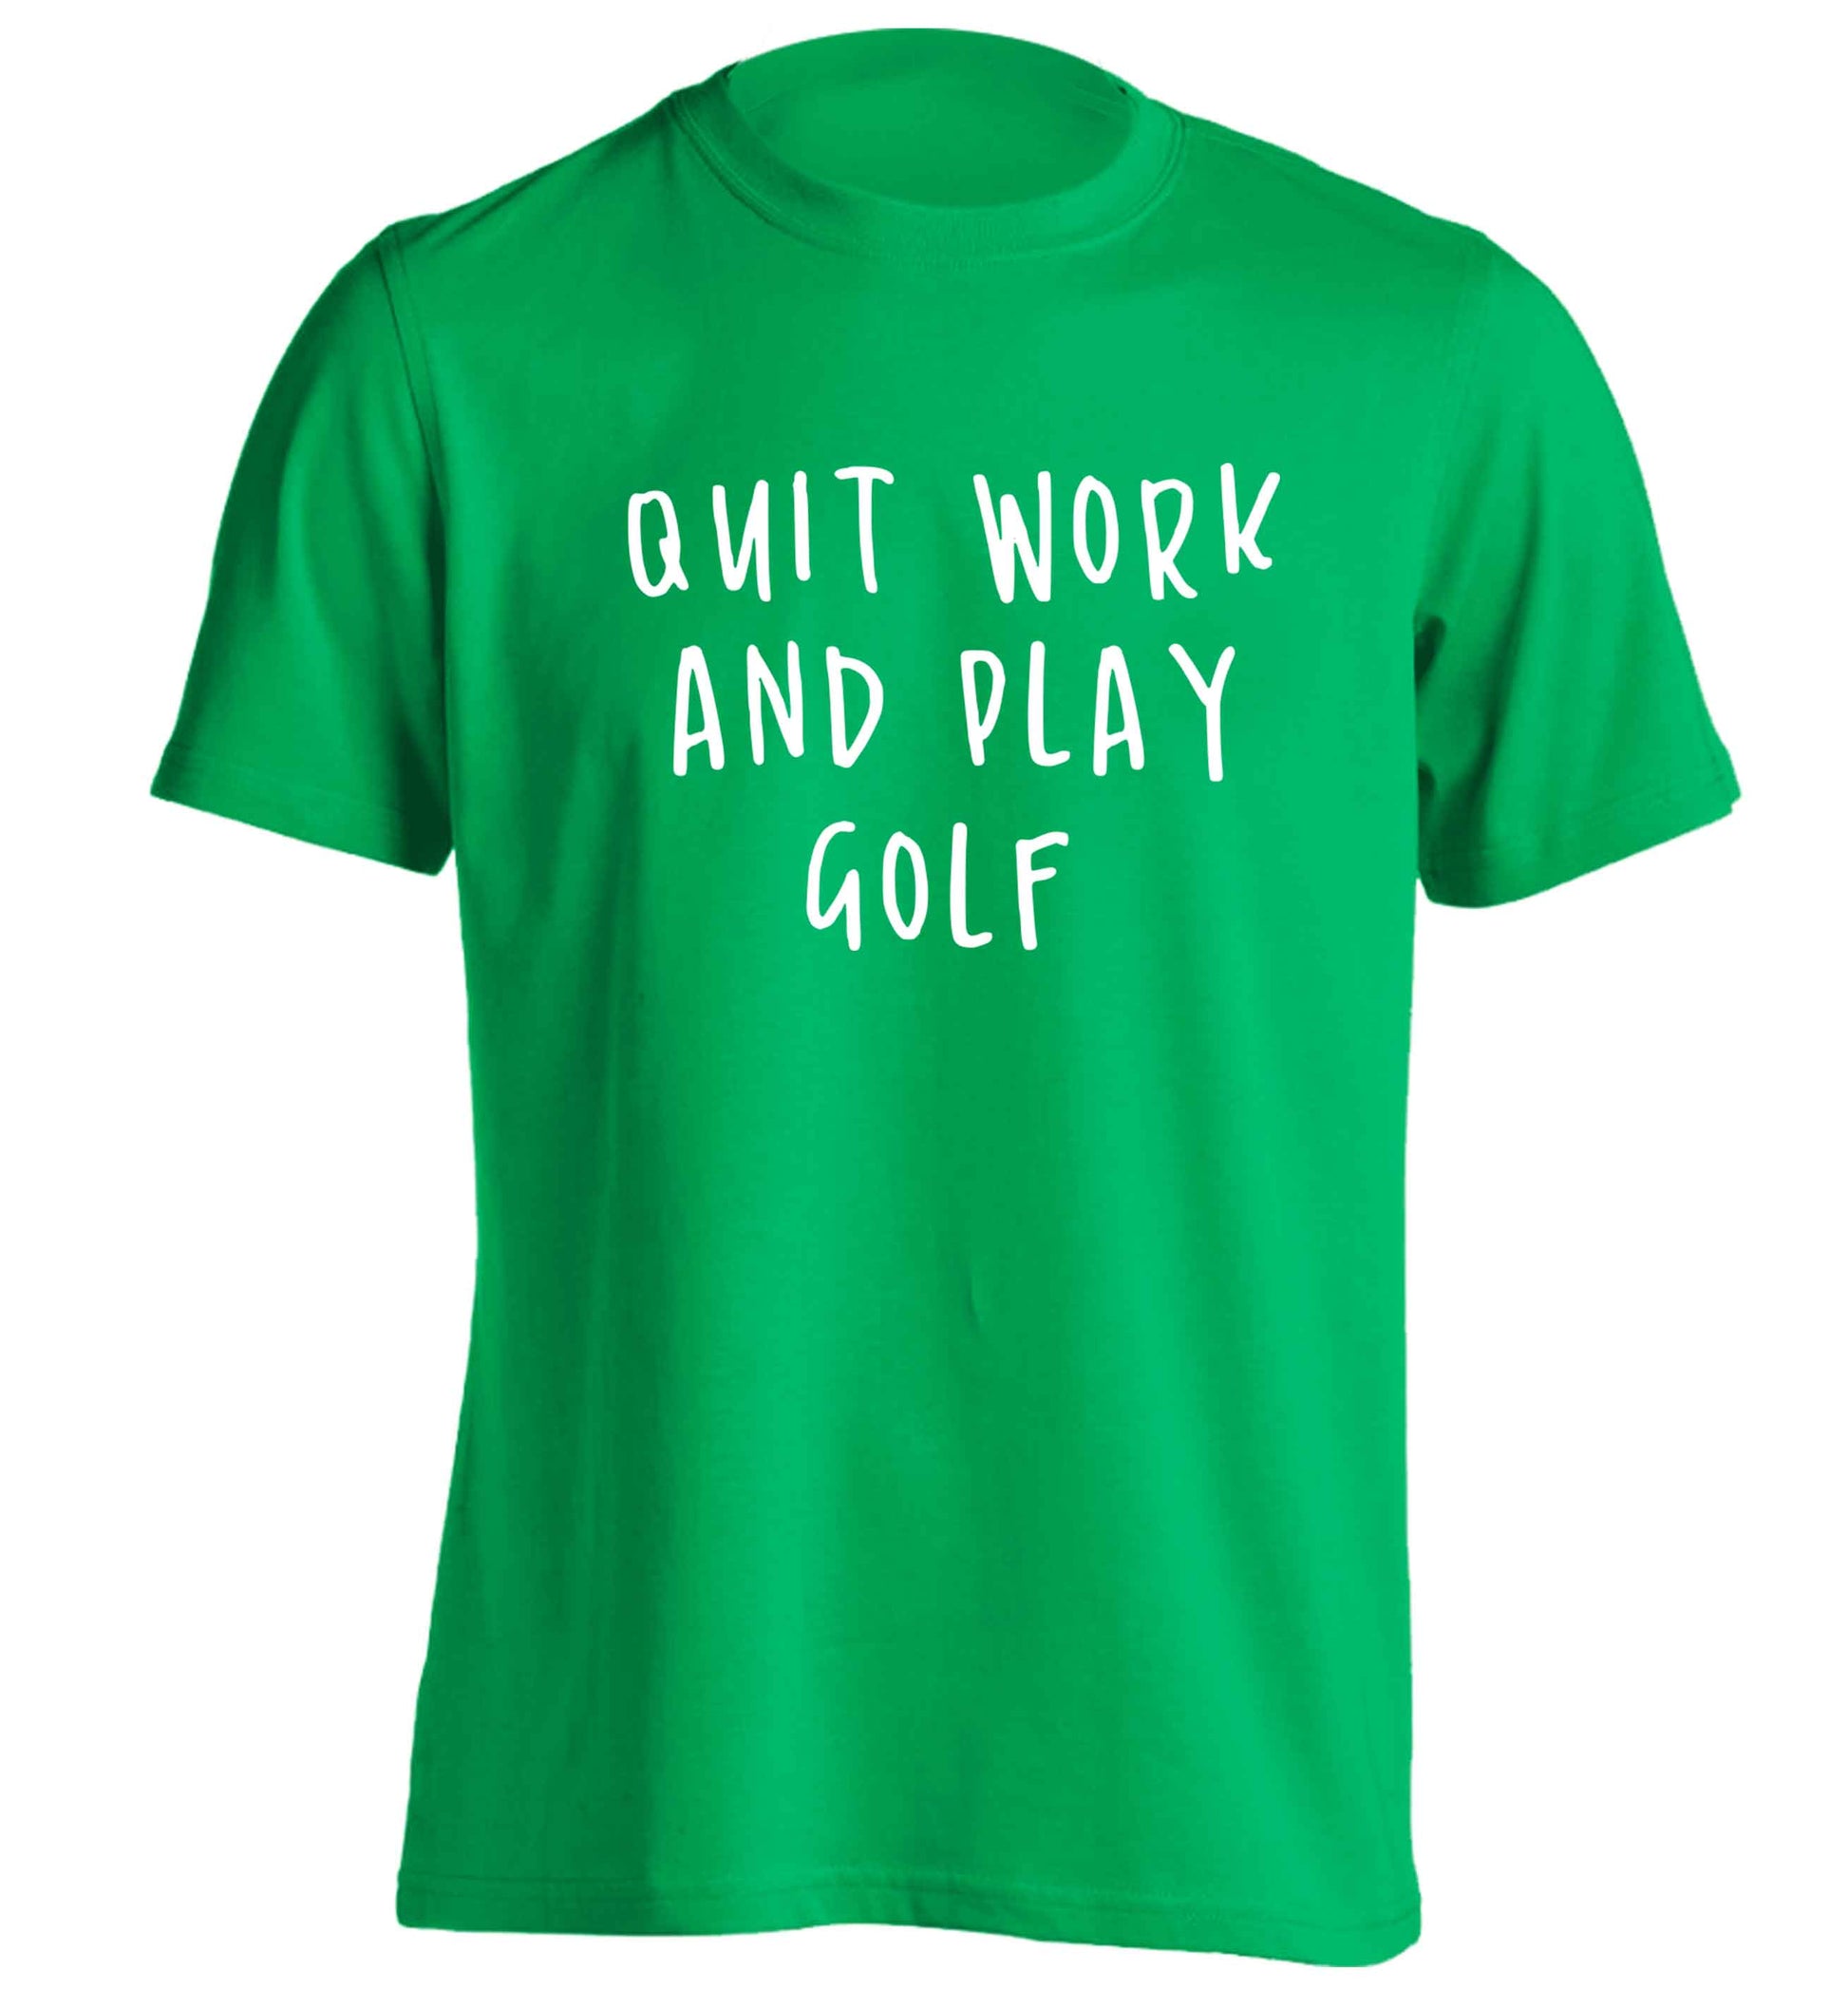 Quit work and play golf adults unisex green Tshirt 2XL